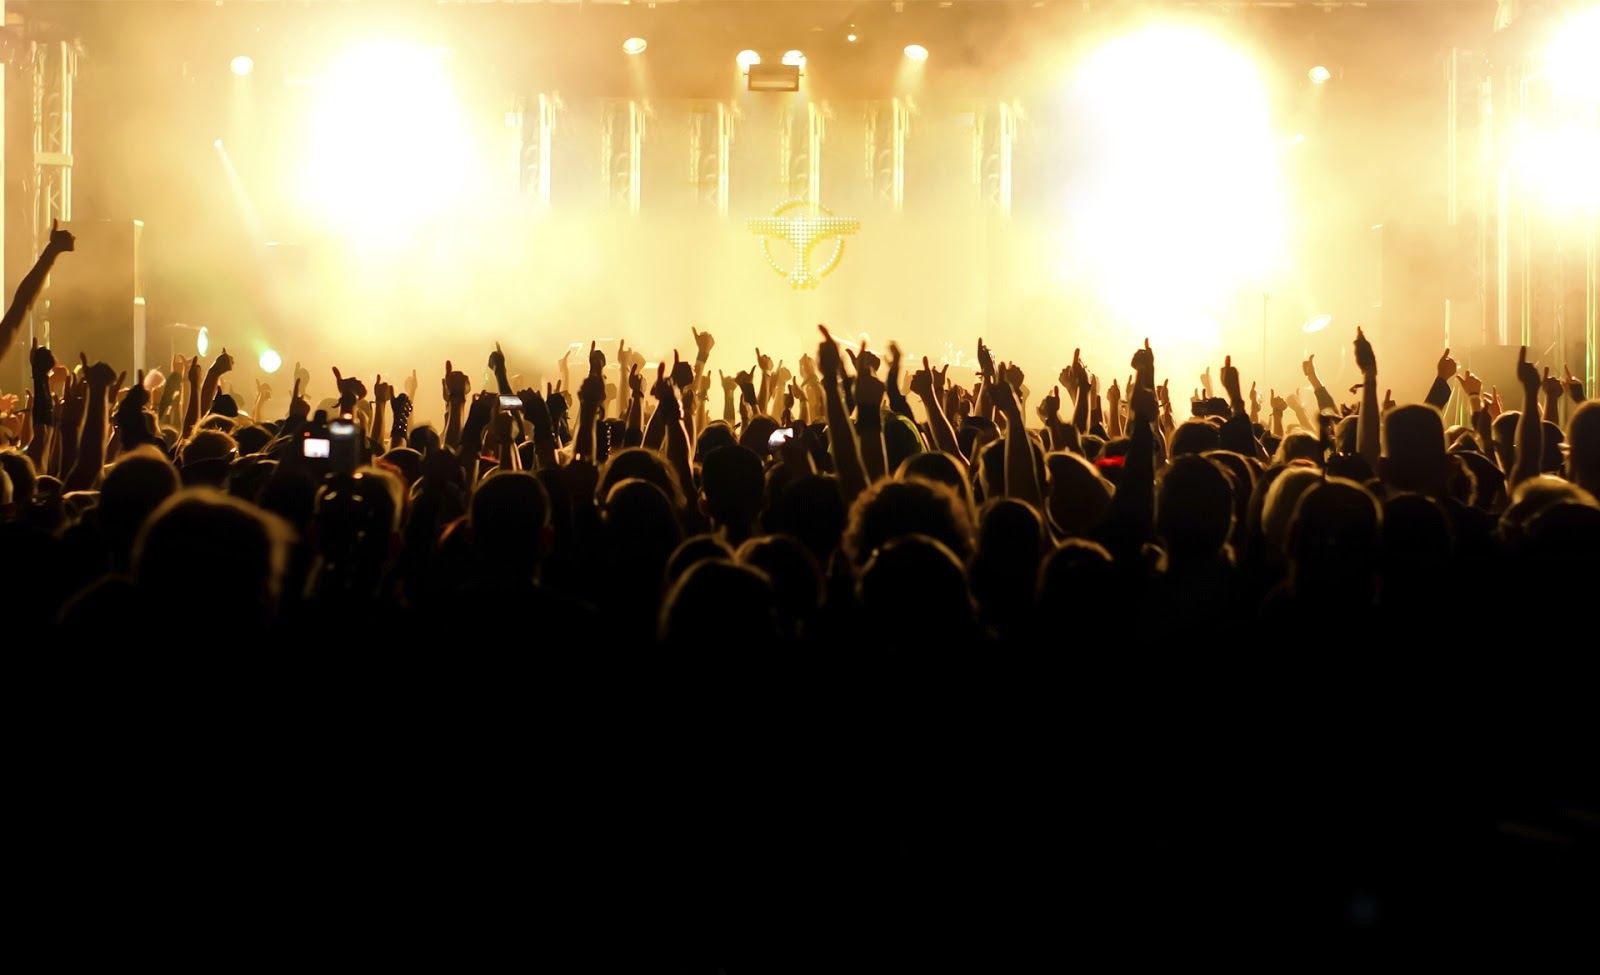 Free download HD wallpapers tiesto concert [1600x975] for your